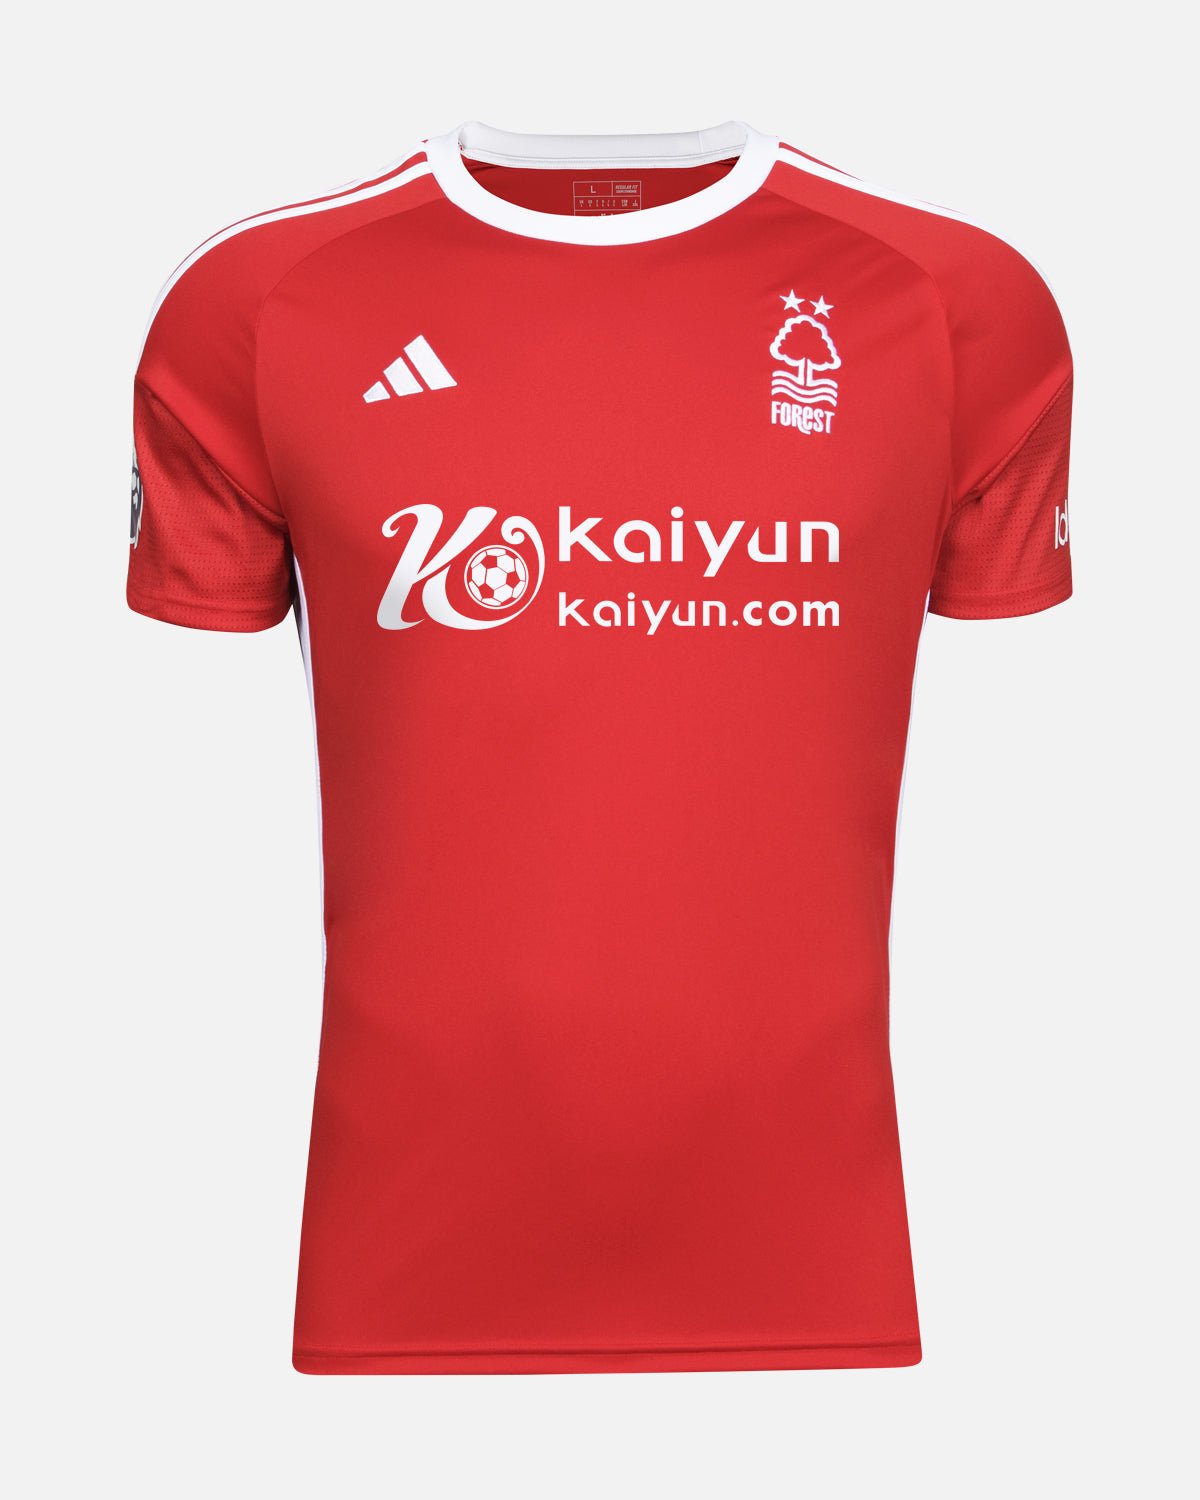 NFFC Home Shirt 23-24 - Toffolo 15 - Nottingham Forest FC